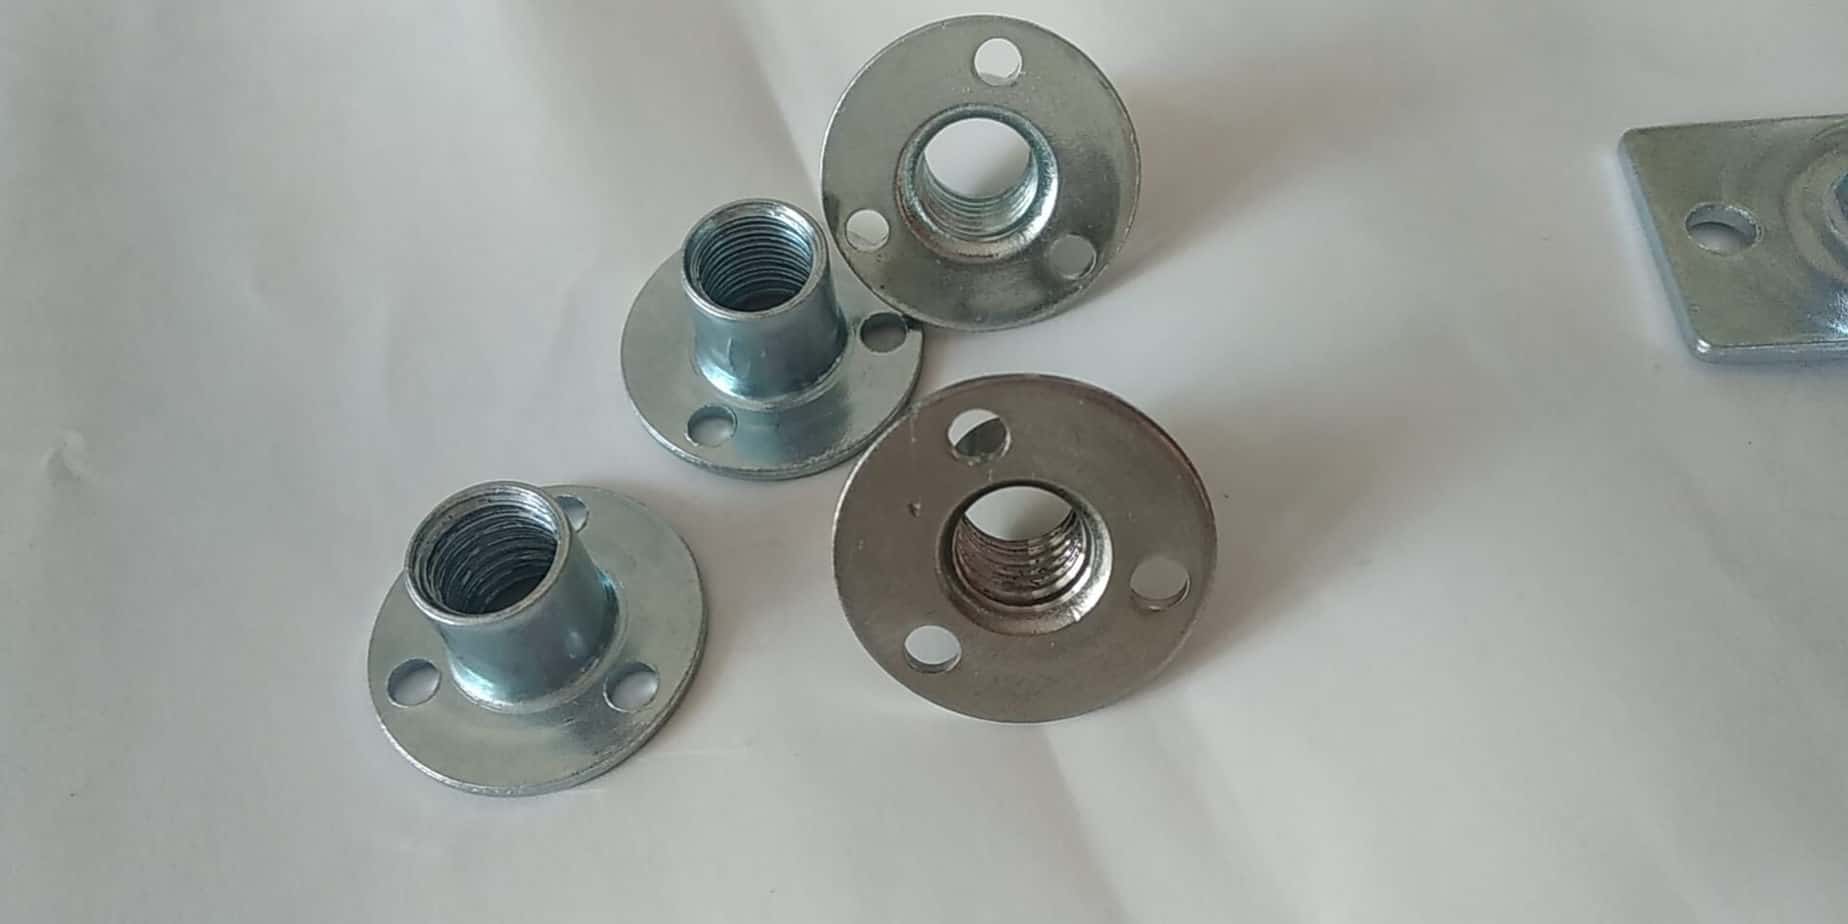 Screw-in Stainless steel, carbon steel M10X12X25 Round Base T-Nuts for climbing Volumes_RMC